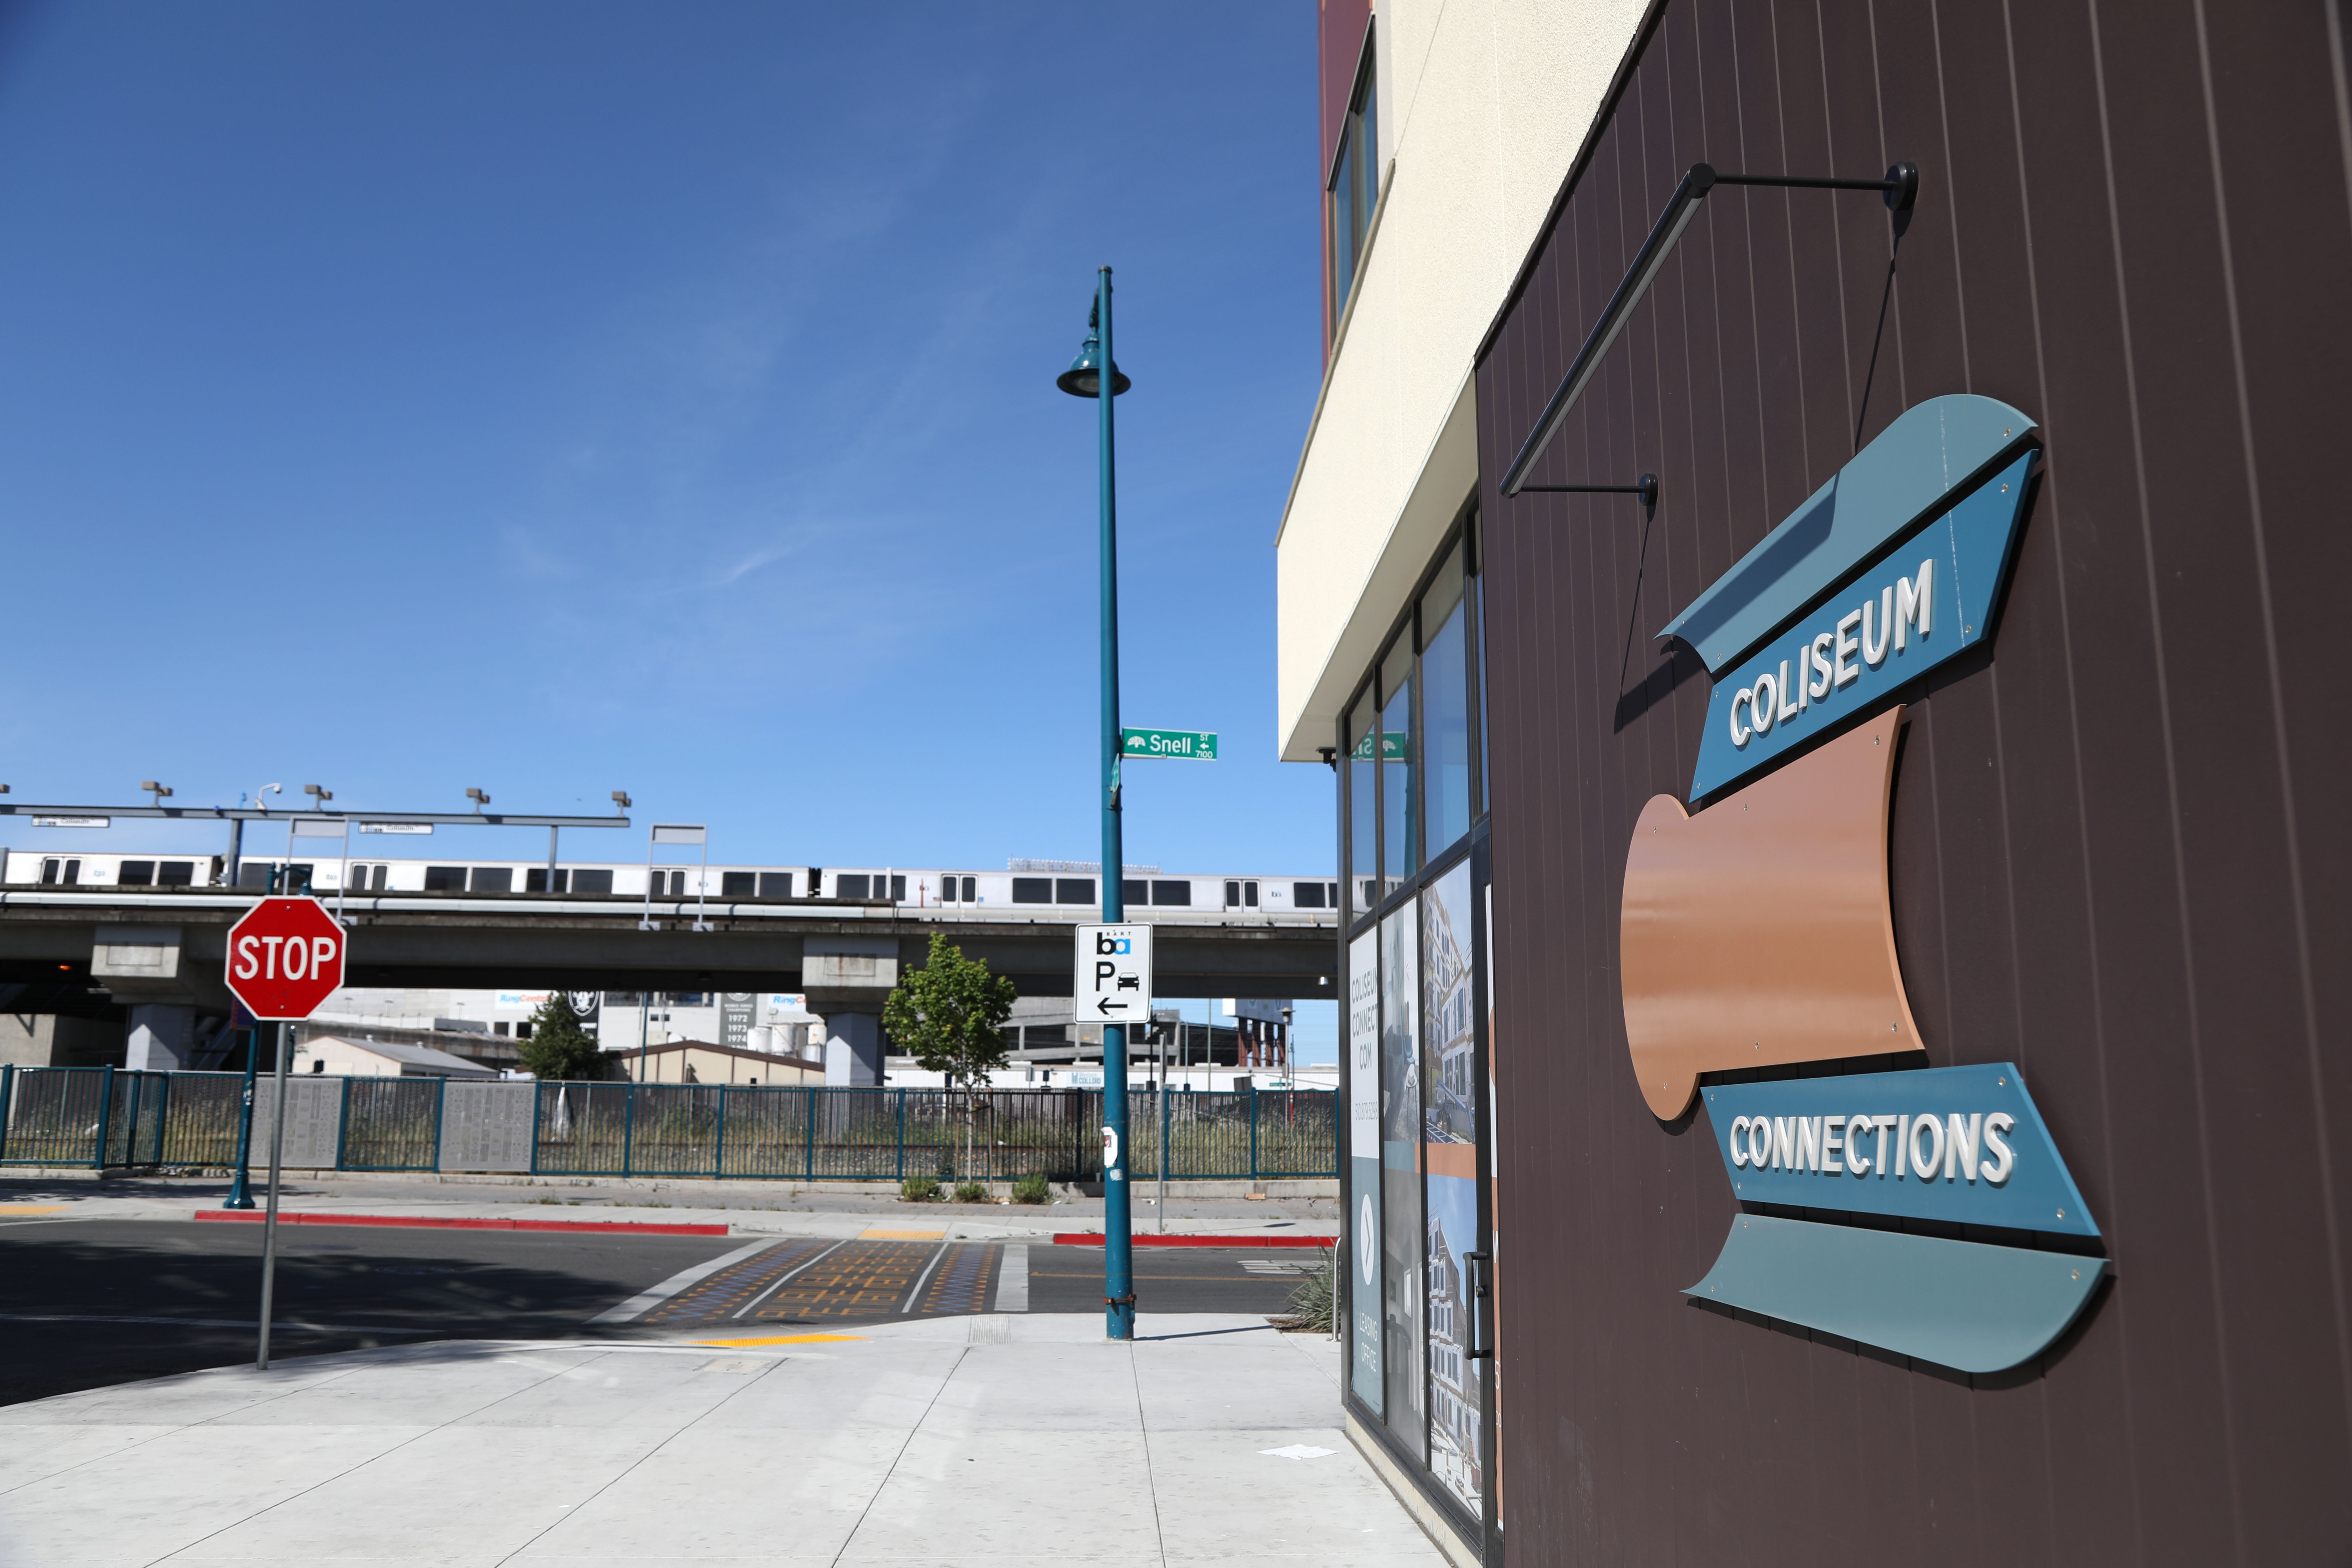 Exterior view of Coliseum Connections building with BART train in the background